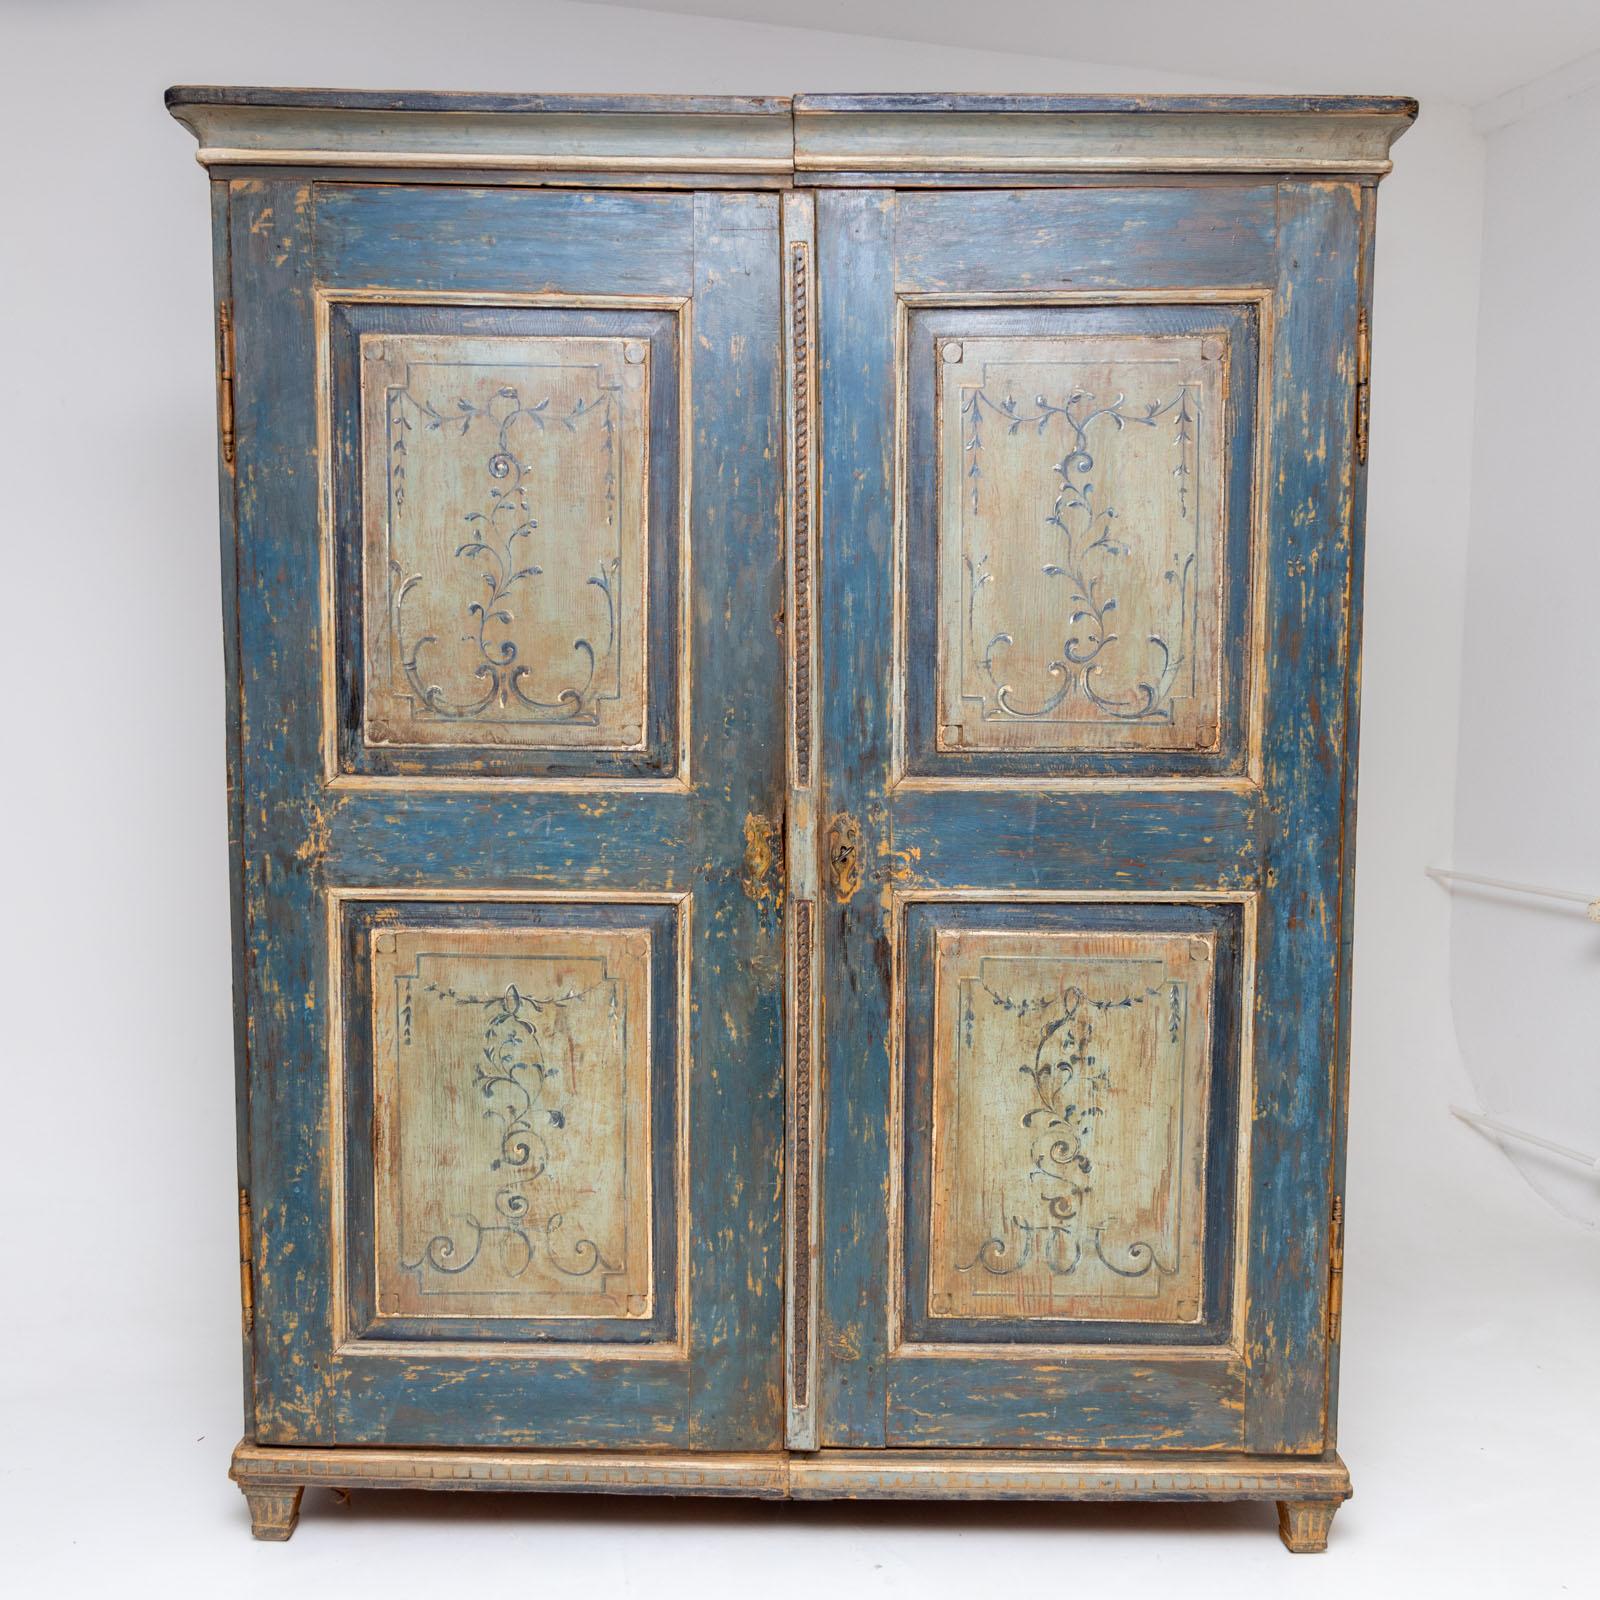 Large two-door cabinet on low fluted square legs with dentil-cut frieze and turned bevel as well as a profiled cornice. The dark blue painting with light blue coffered fields with tendril decoration has been decoratively patinated.